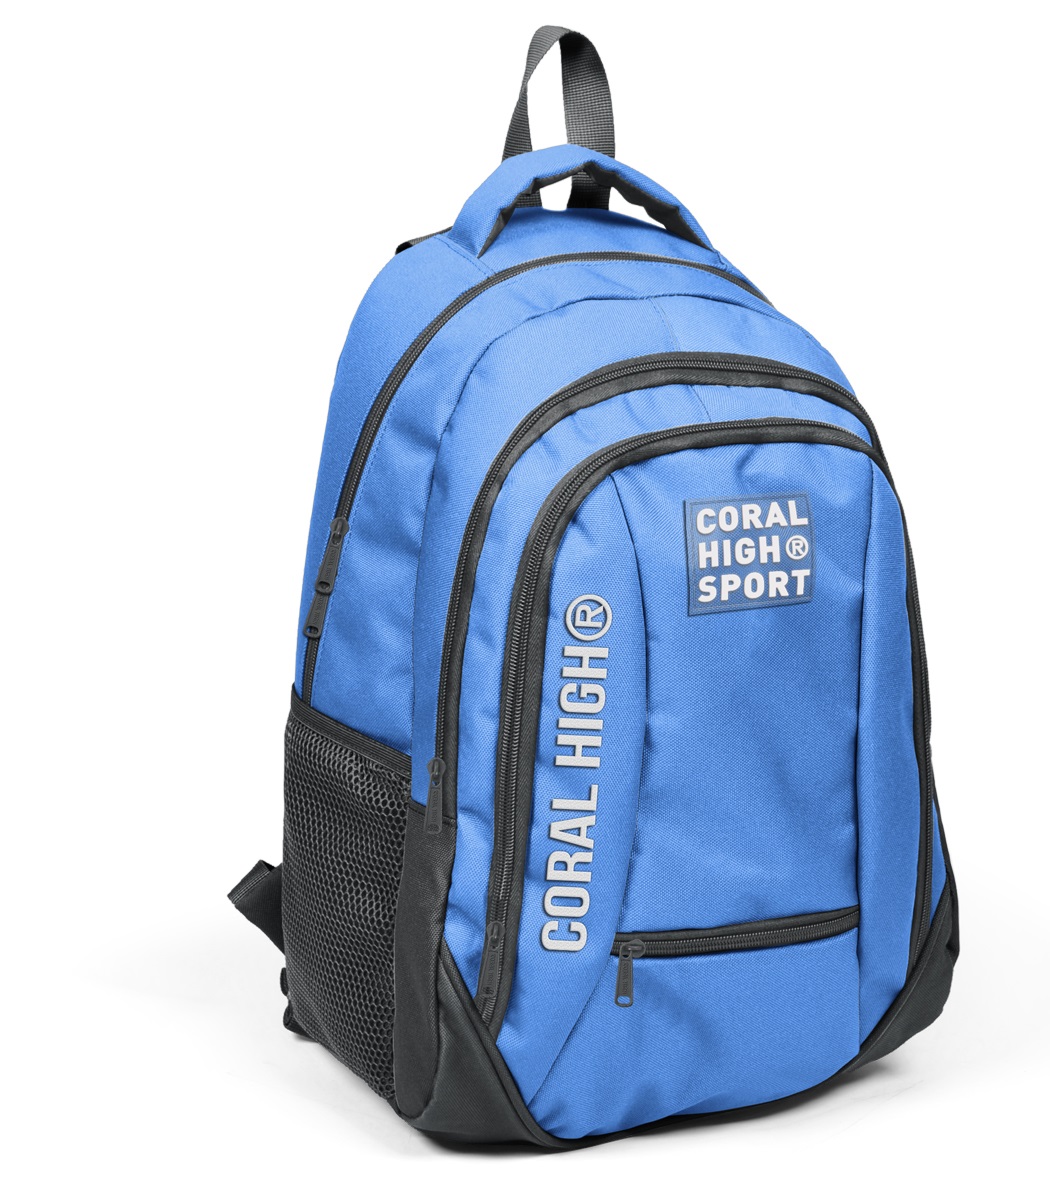 Coral High Sport Four Compartment Backpack - Deep Blue Dark Gray